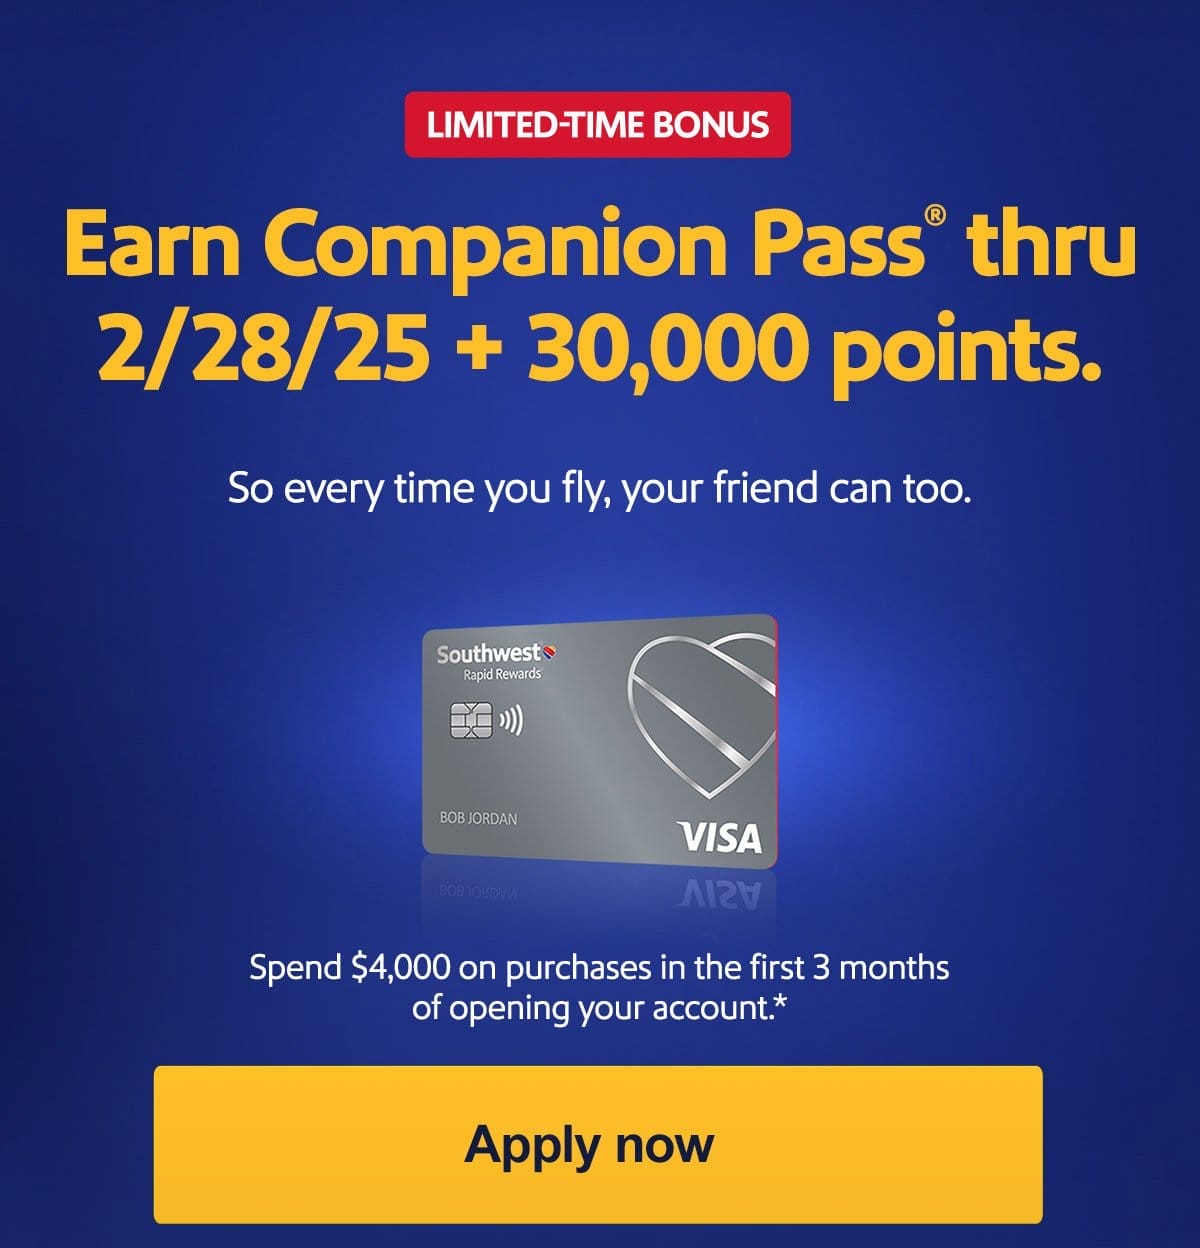 LIMITED-TIME BONUS Earn Companion Pass thru 2/28/25 + 30,000 points. So every time you fly, your friend can too. Spend \\$4,000 on purchases in the first 3 months of opening your account.* [Apply now]